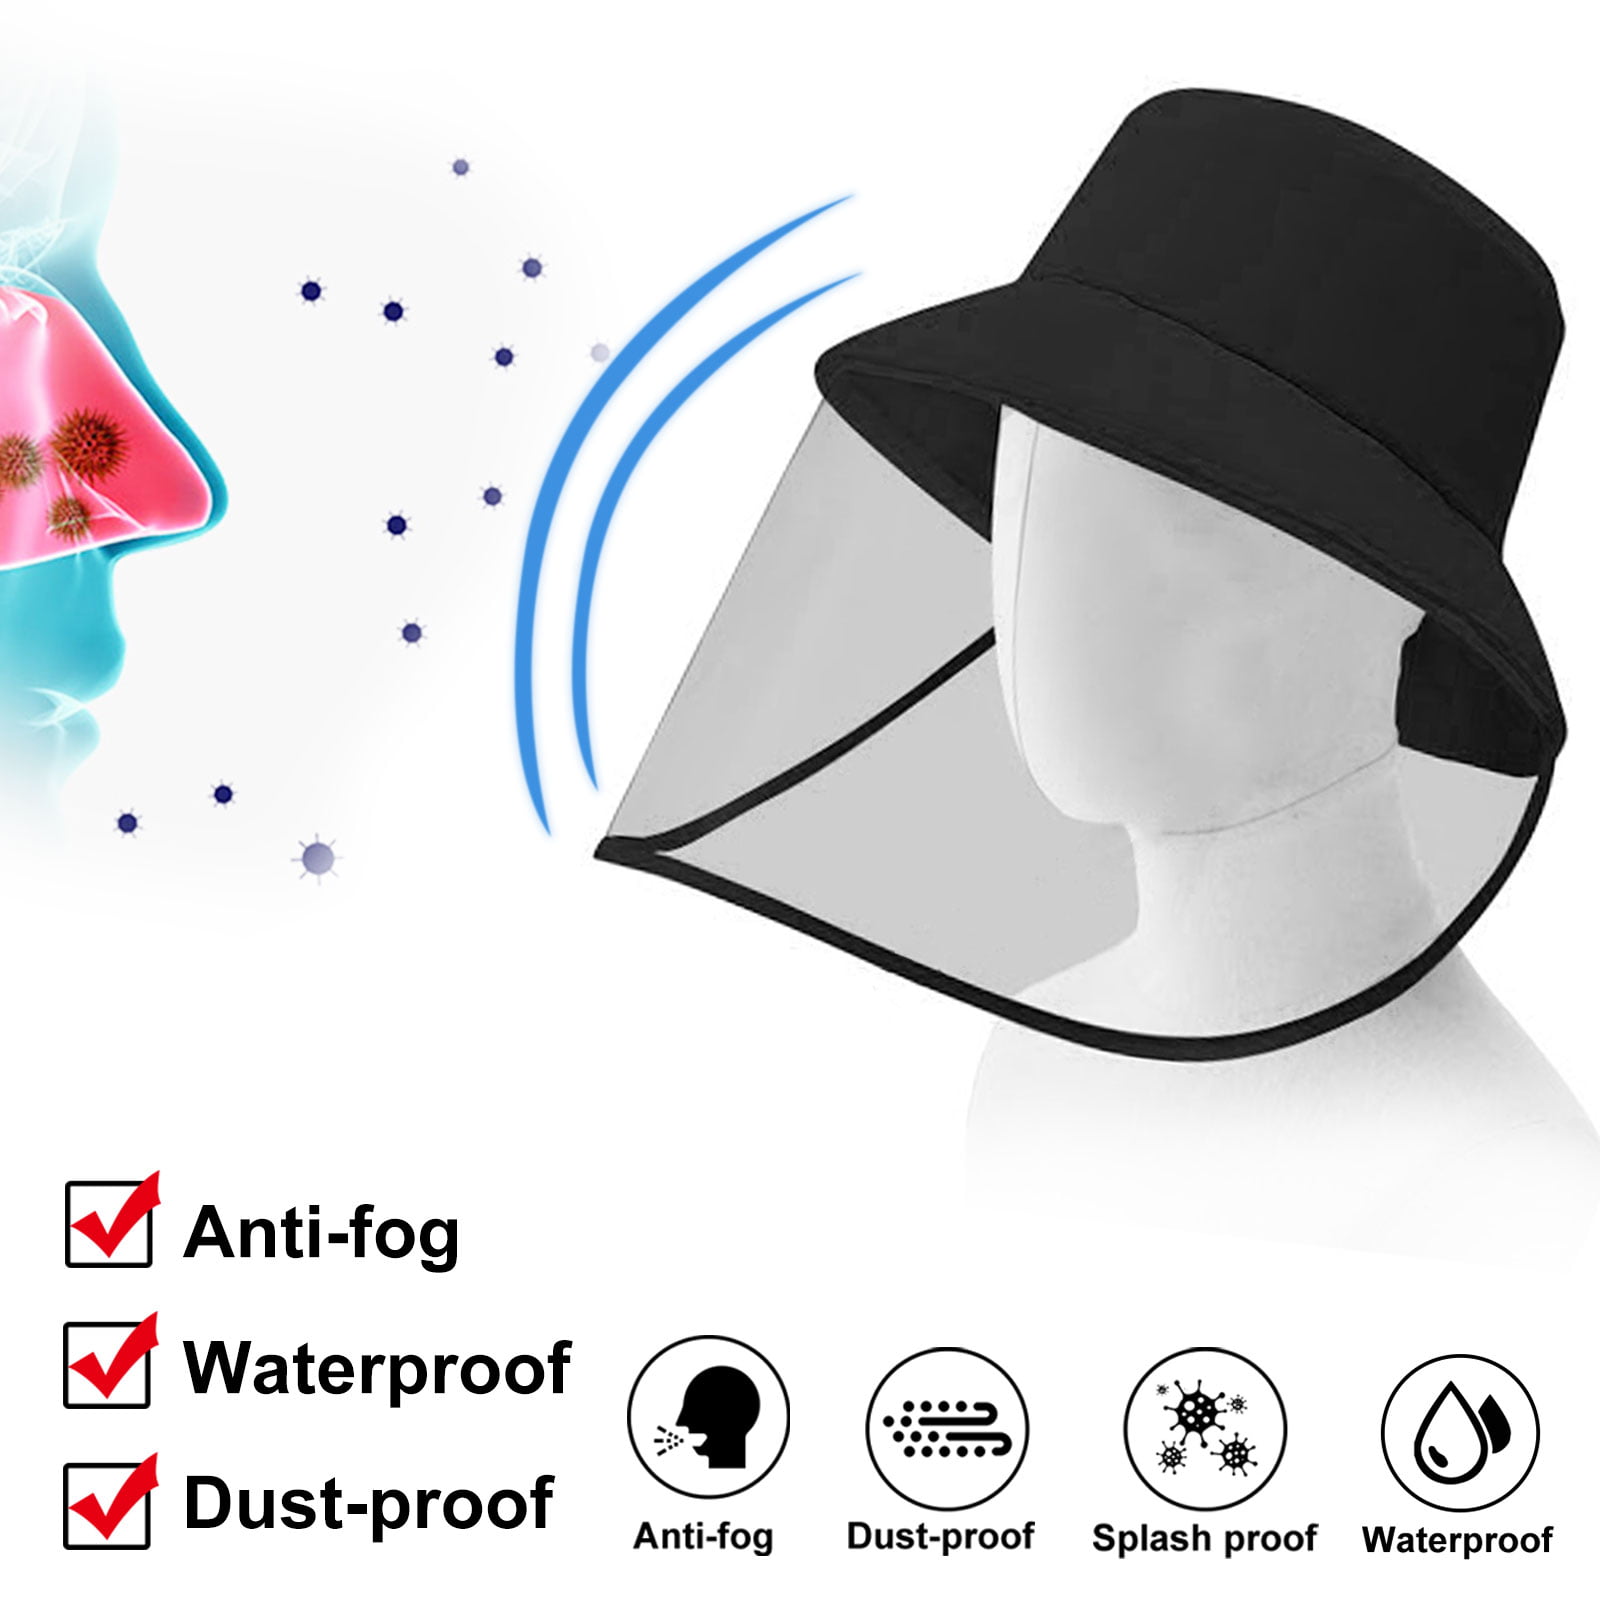 SoulQ Protective Hats,Safety Anti-Spitting Hat Full Face Shield,Anti-Fog Cover,Epidemic Protection Viruses Isolation Cap,Waterproof&Dust-proof Outdoor Sun Shade Fisherman Cap 